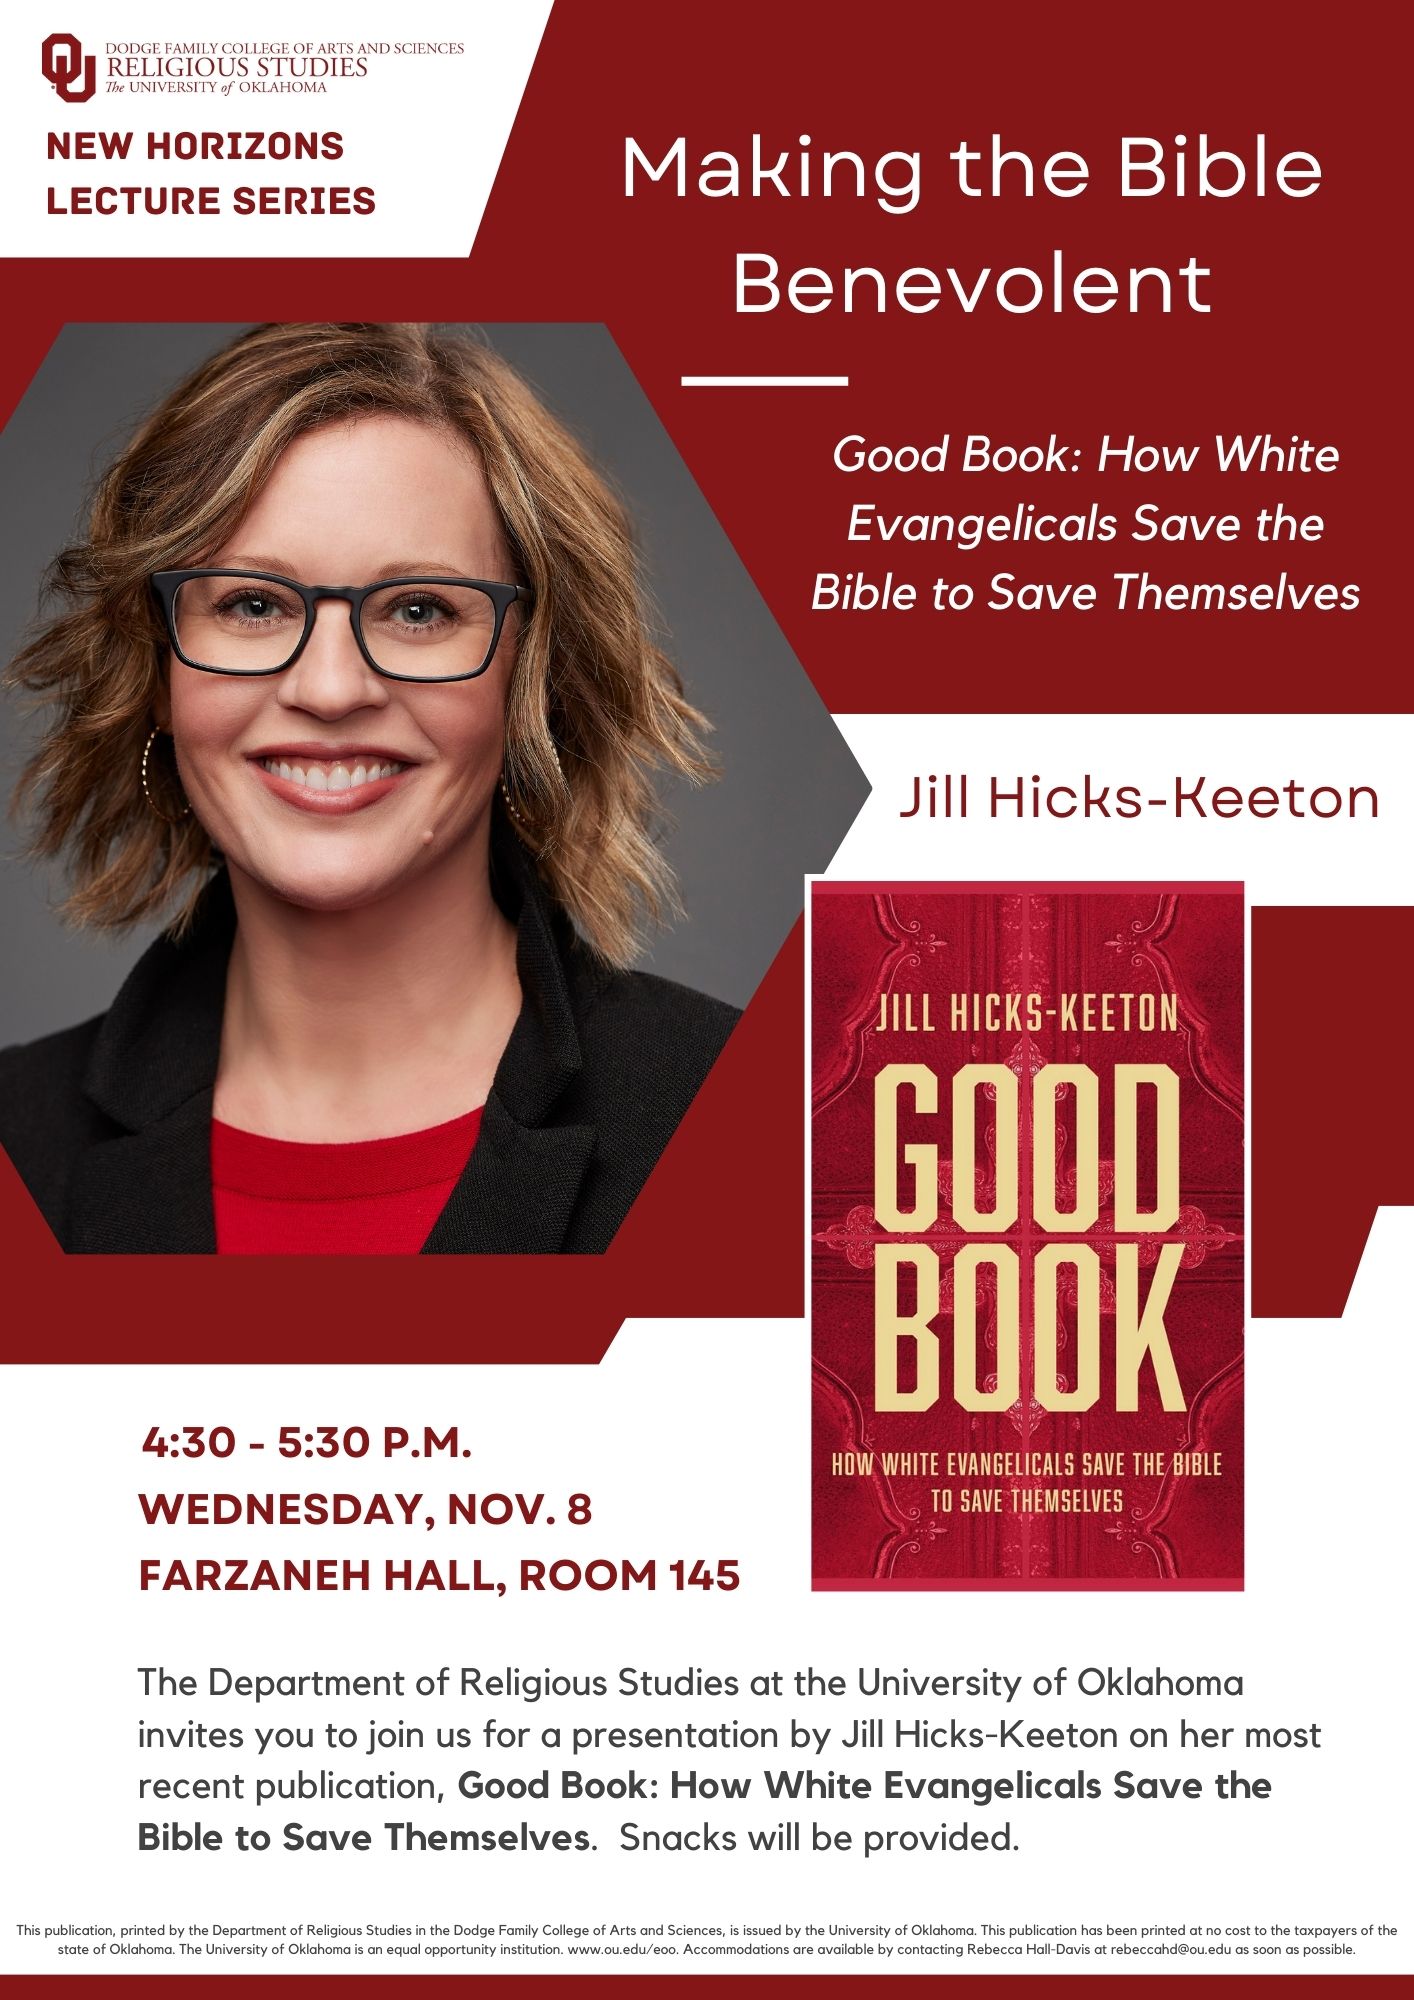 The Department of Religious Studies at the University of Oklahoma invites you to join us for a presentation by Jill Hicks-Keeton titled "Making the Bible Benevolent" on her most recent publication, Good Book: How White Evangelicals Save the Bible to Save Themselves.  Snacks will be provided.  4:30 - 5:30 p.m.  Wed.., Nov. 8, 2023  Farzaneh Hall, Room 145